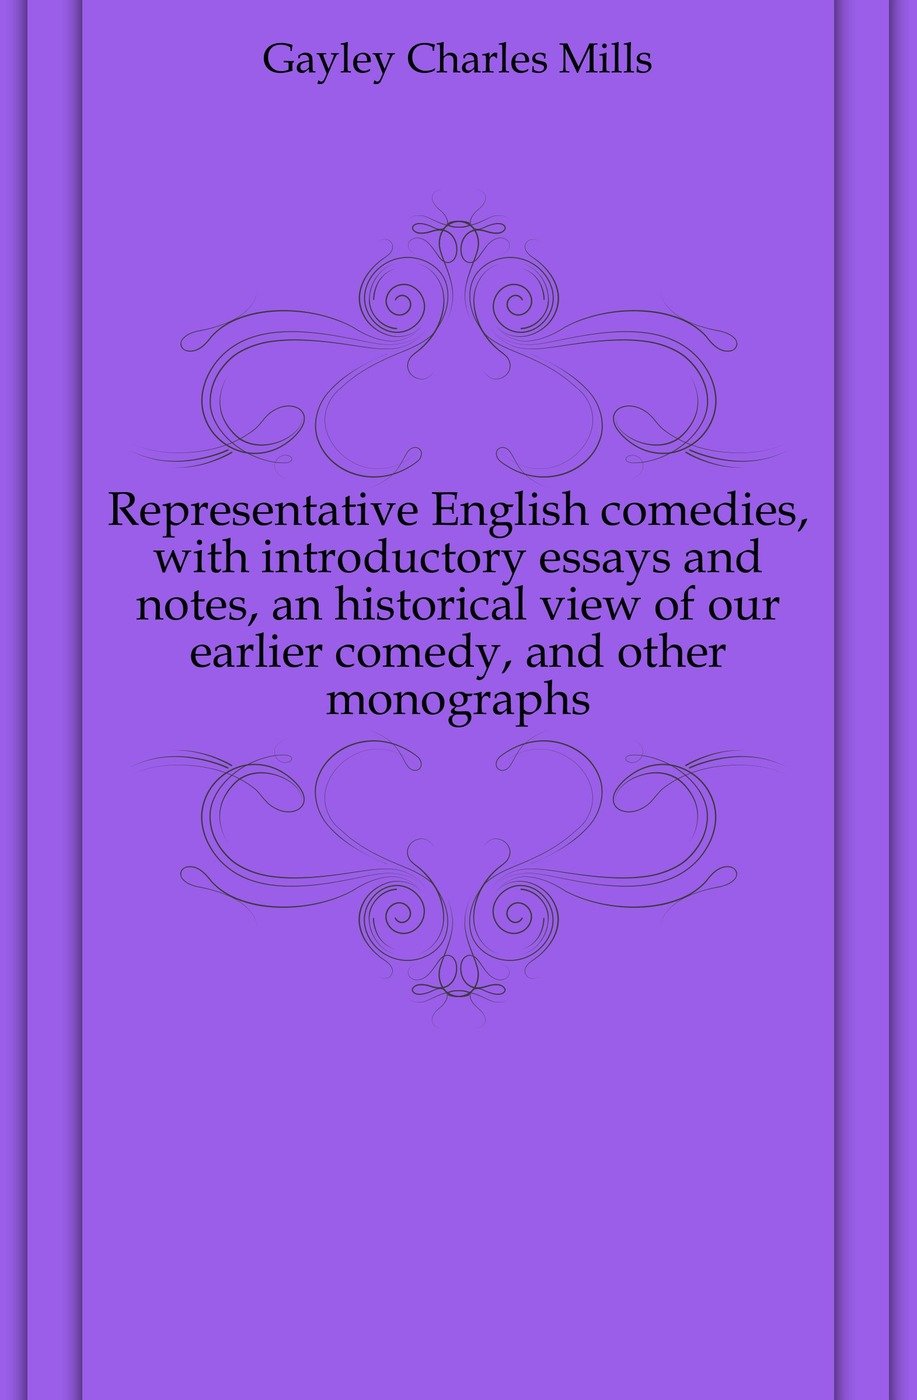 Representative English comedies, with introductory essays and notes, an historical view of our earlier comedy, and other monographs